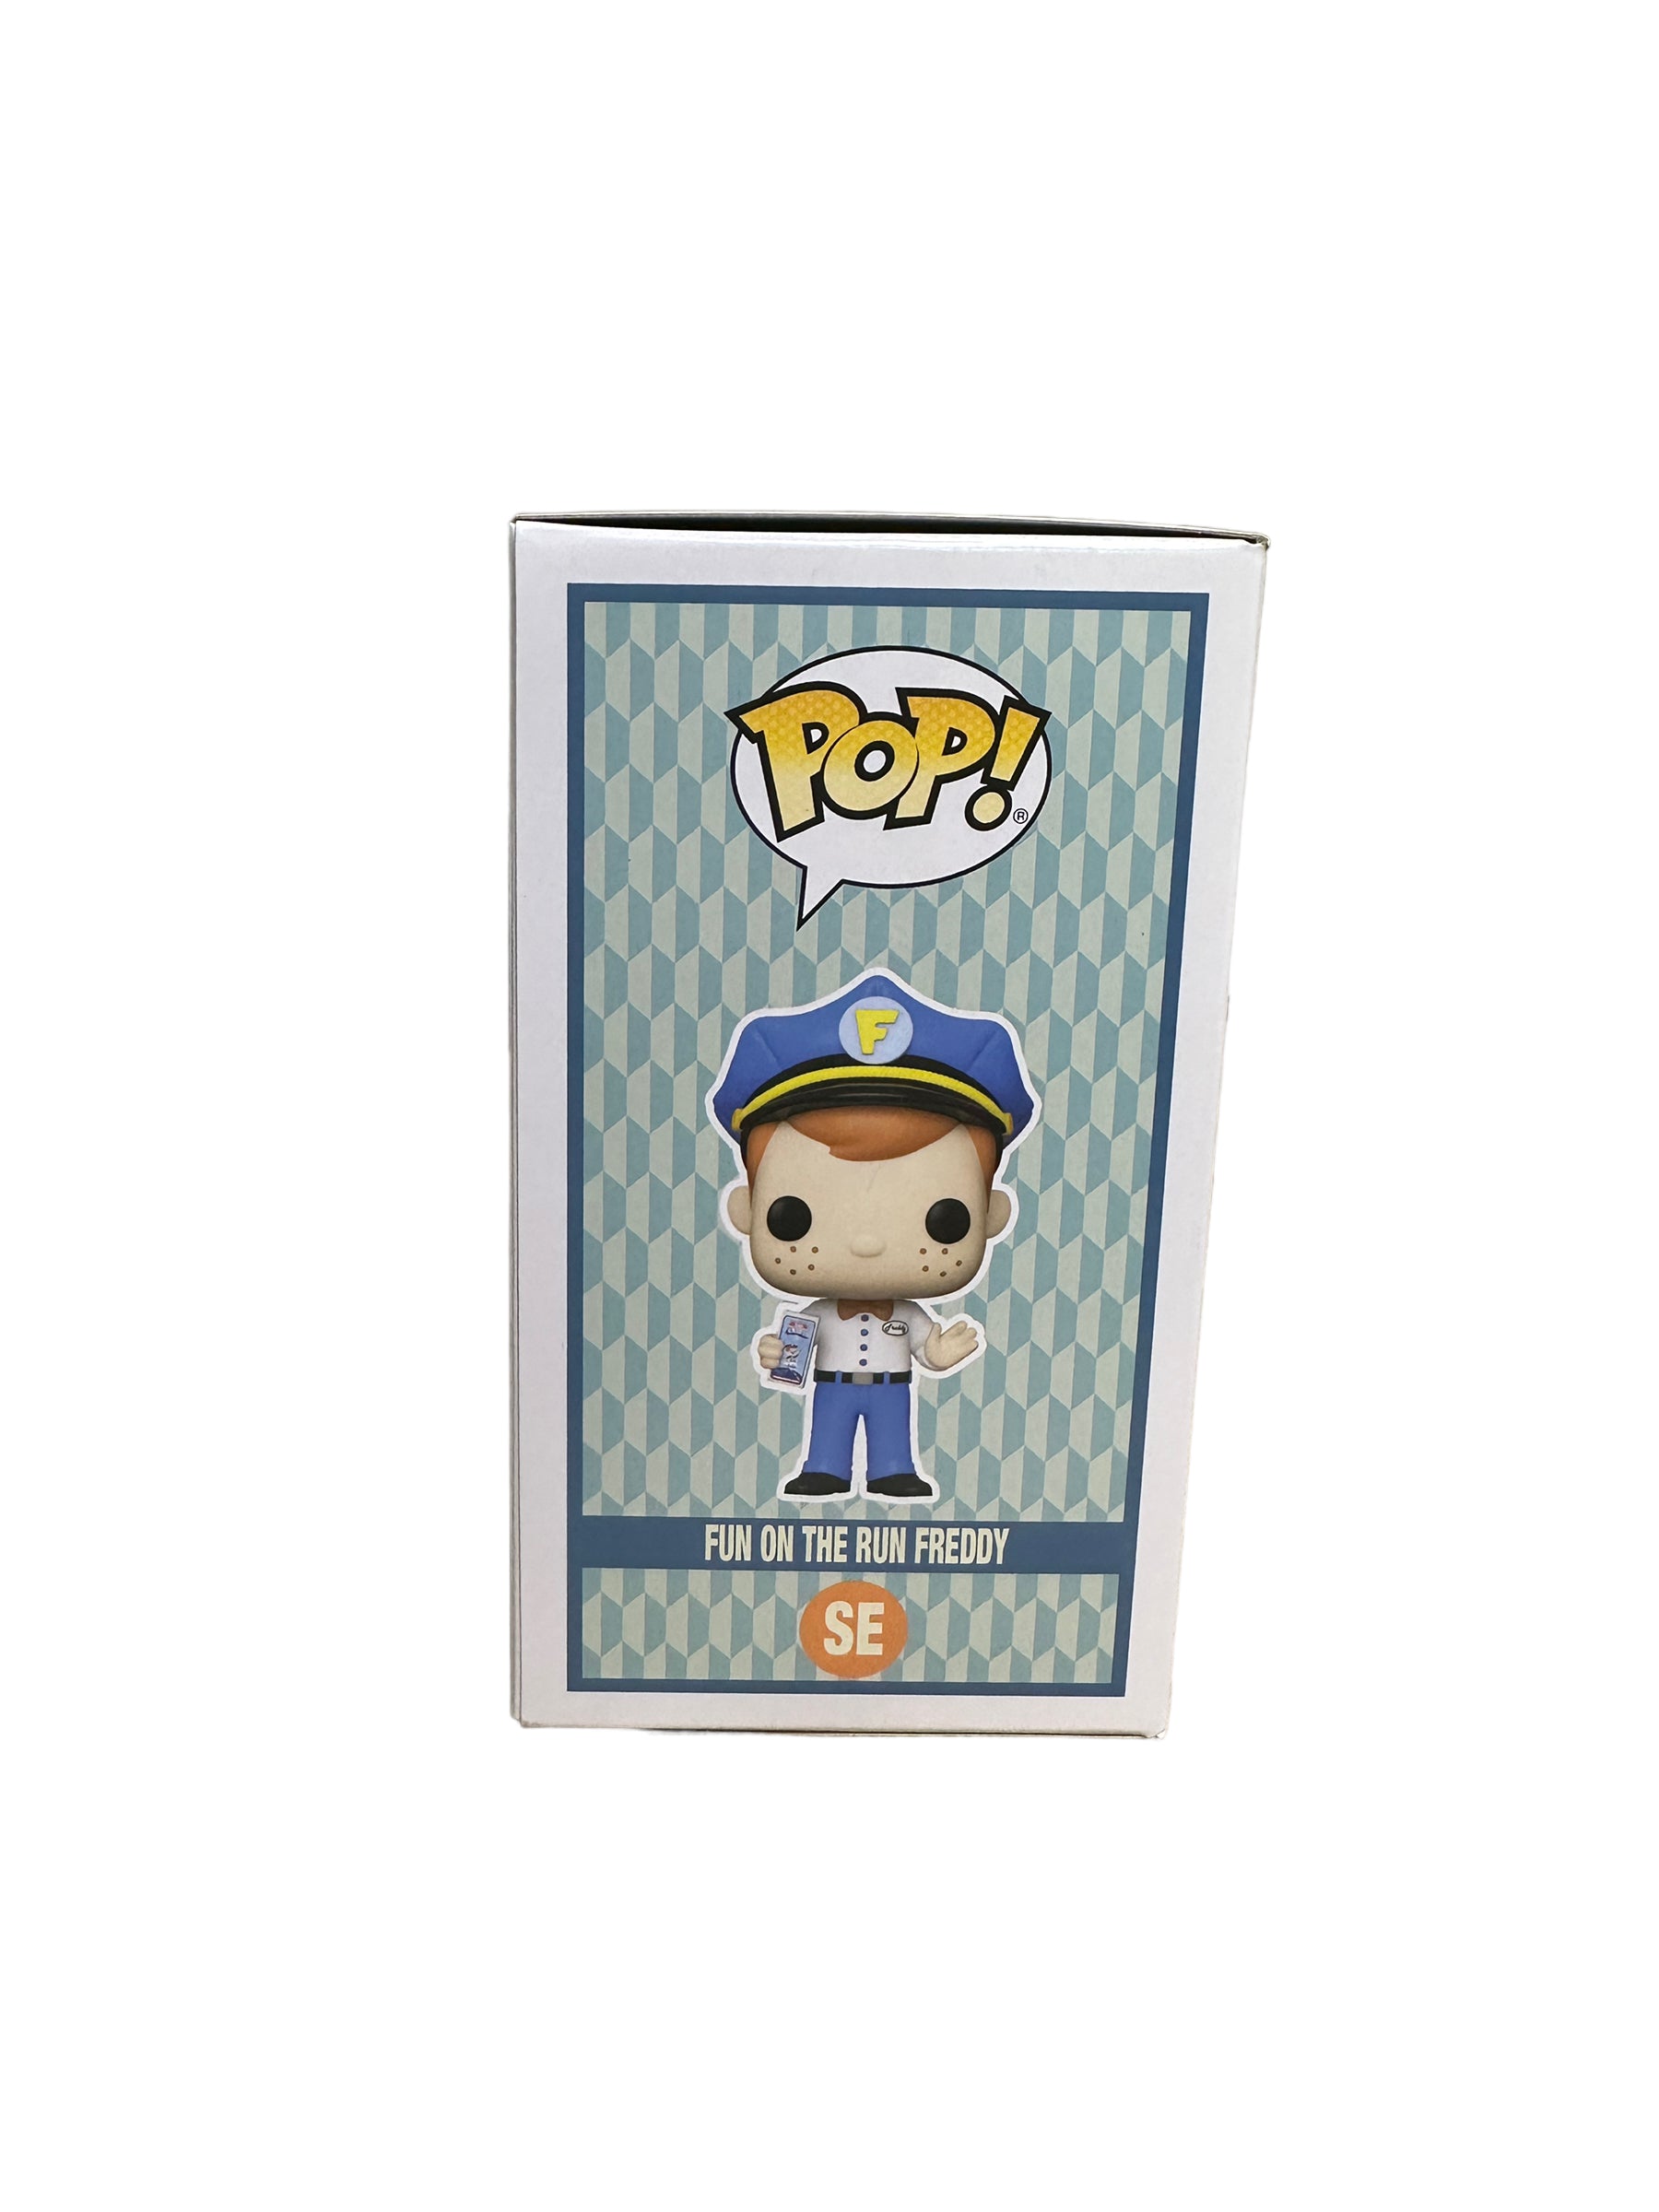 Fun on the Run Freddy Funko Pop! - Funkoville - SDCC 2023 Official Convention Exclusive - Condition 9/10